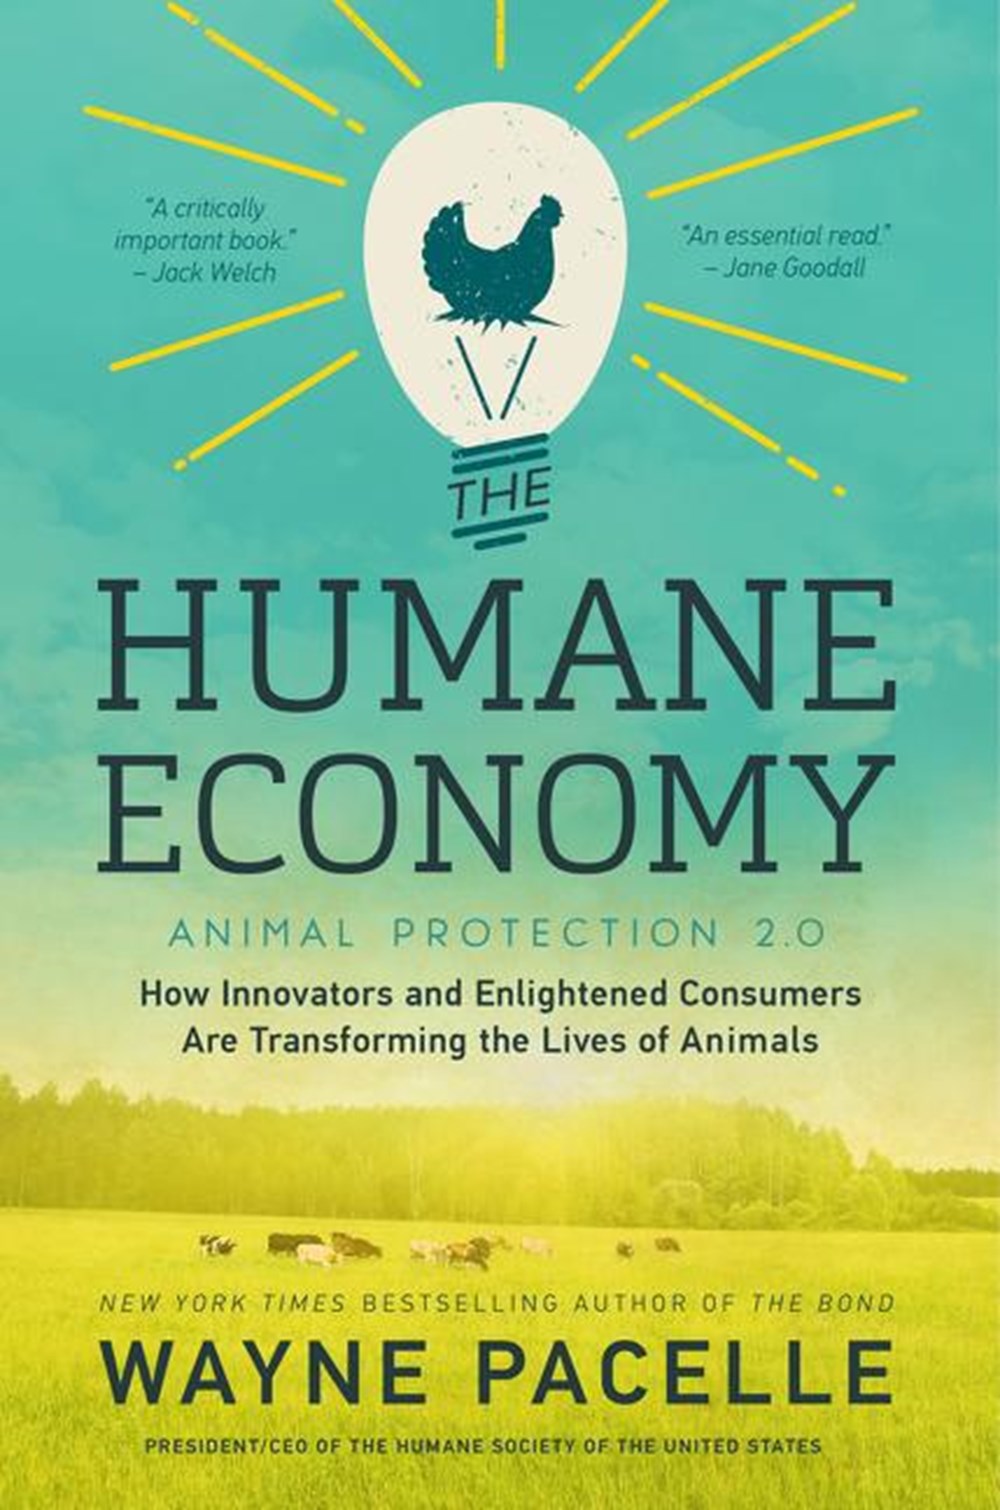 Humane Economy: How Innovators and Enlightened Consumers Are Transforming the Lives of Animals